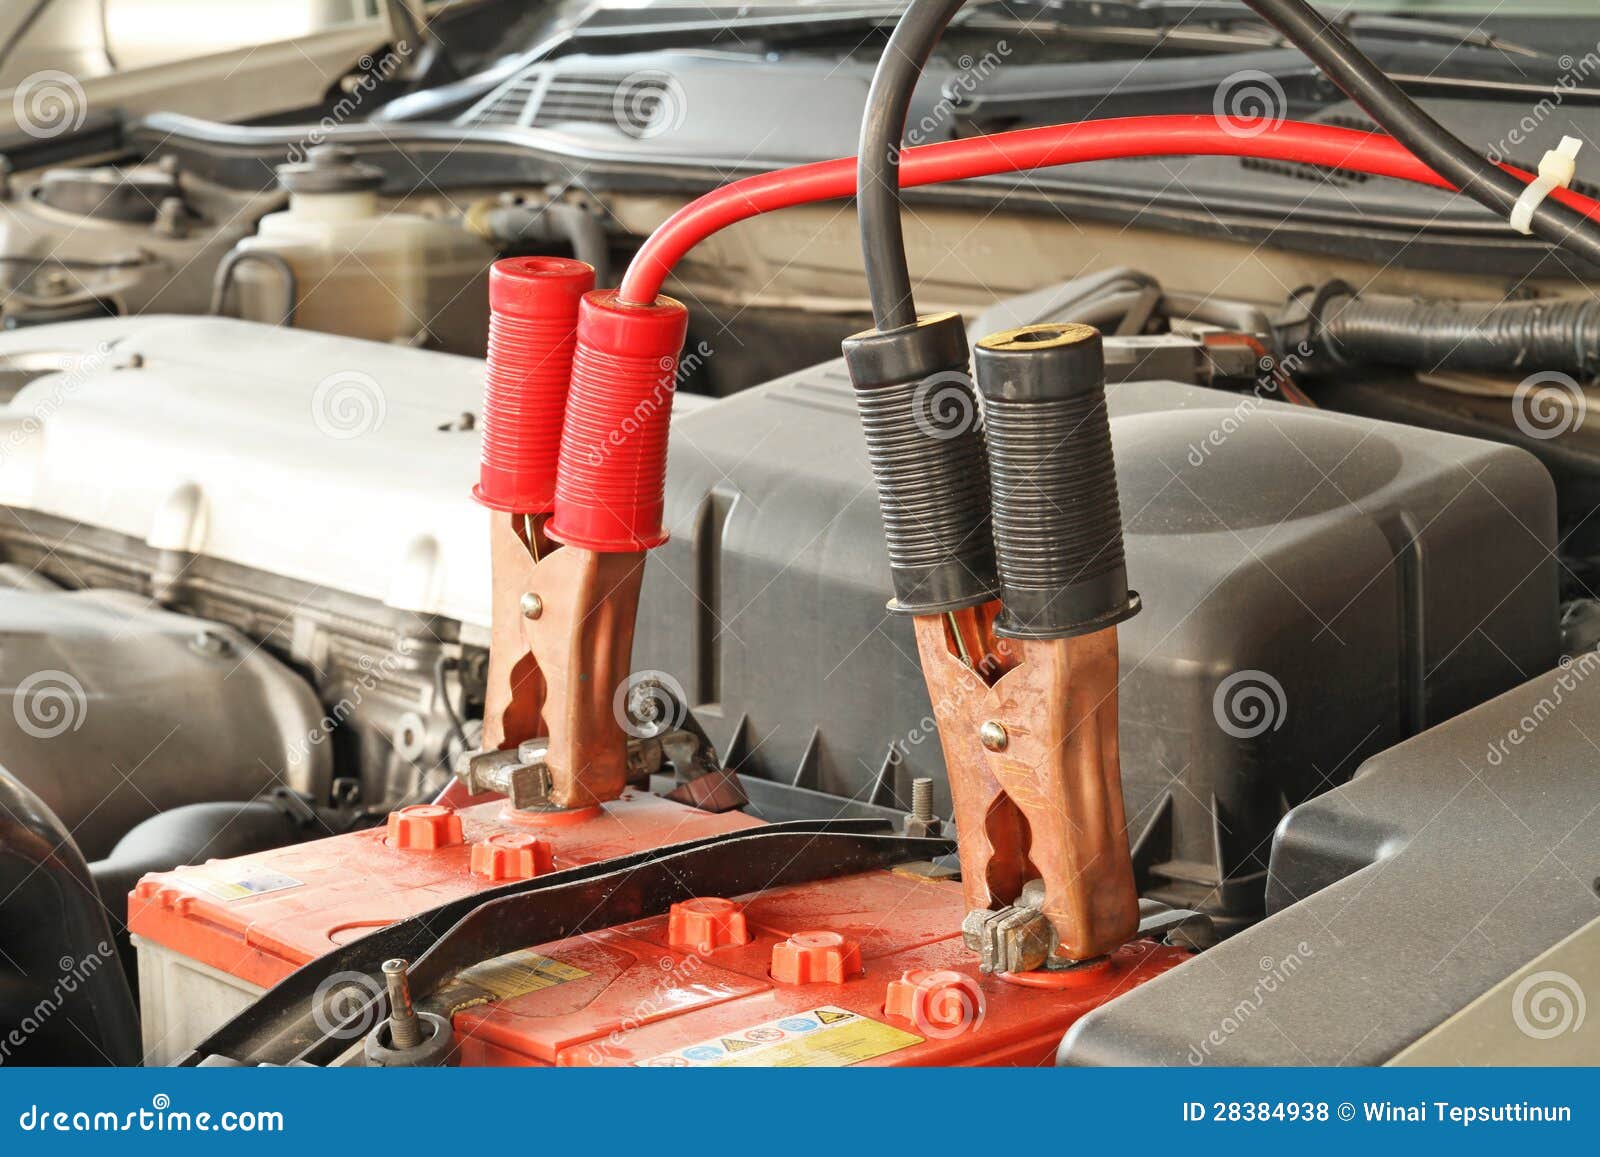 jumper cables on a car